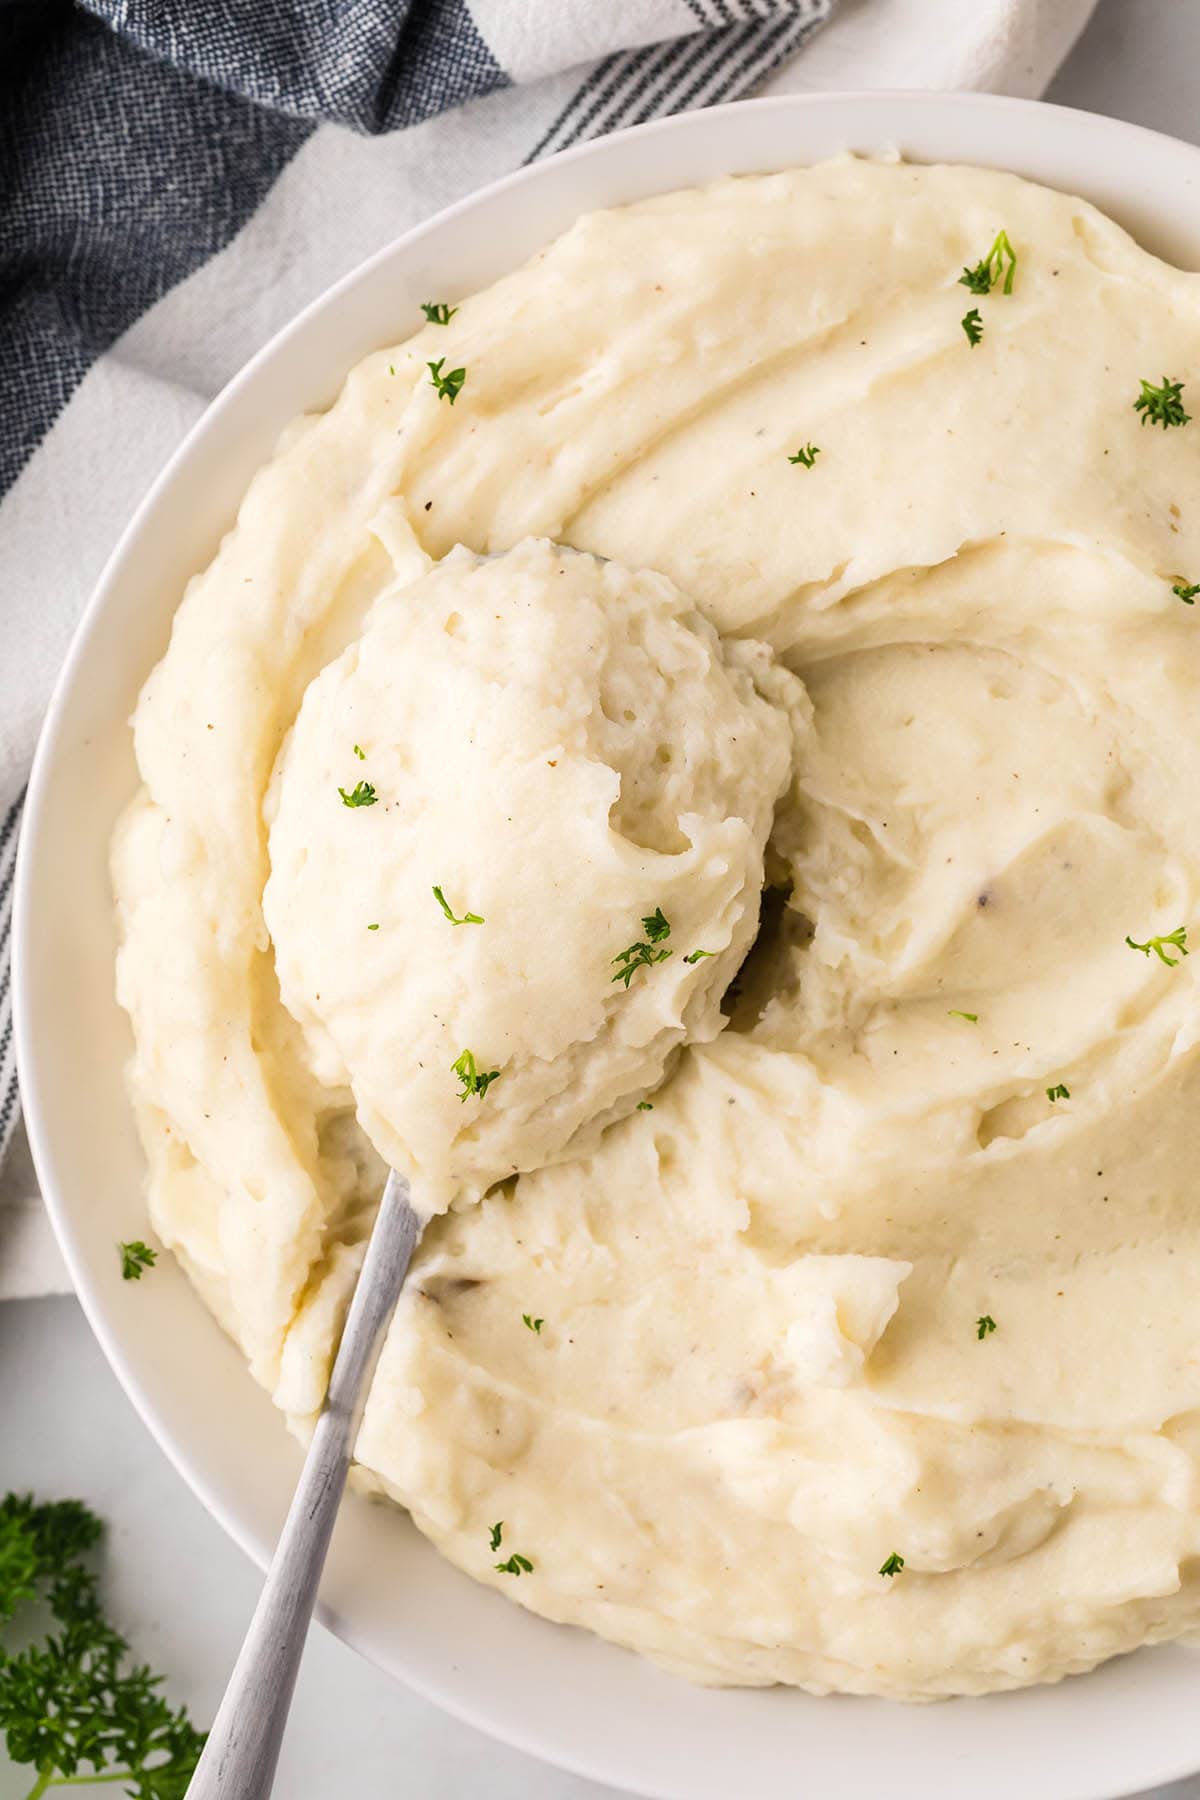 A large bowl filled with creamy mashed potatoes, with a serving spoon.